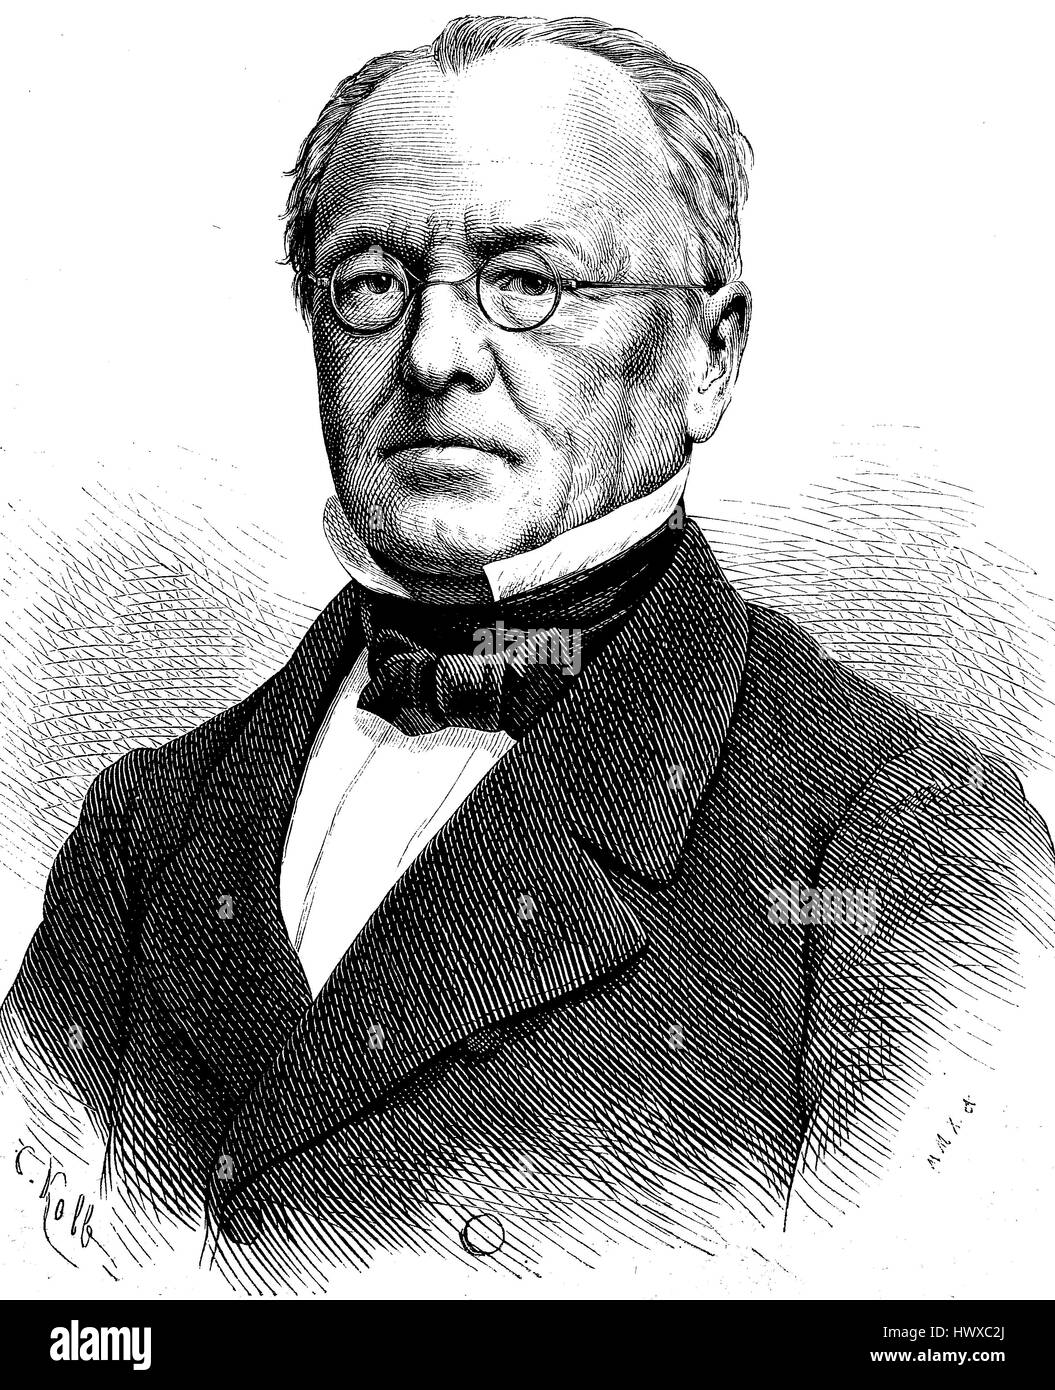 Heinrich Leo, 19 March 1799 - 24 April 1878, was a German historian and politician, Germany    , reproduction of an image, woodcut from the year 1881, digital improved Stock Photo